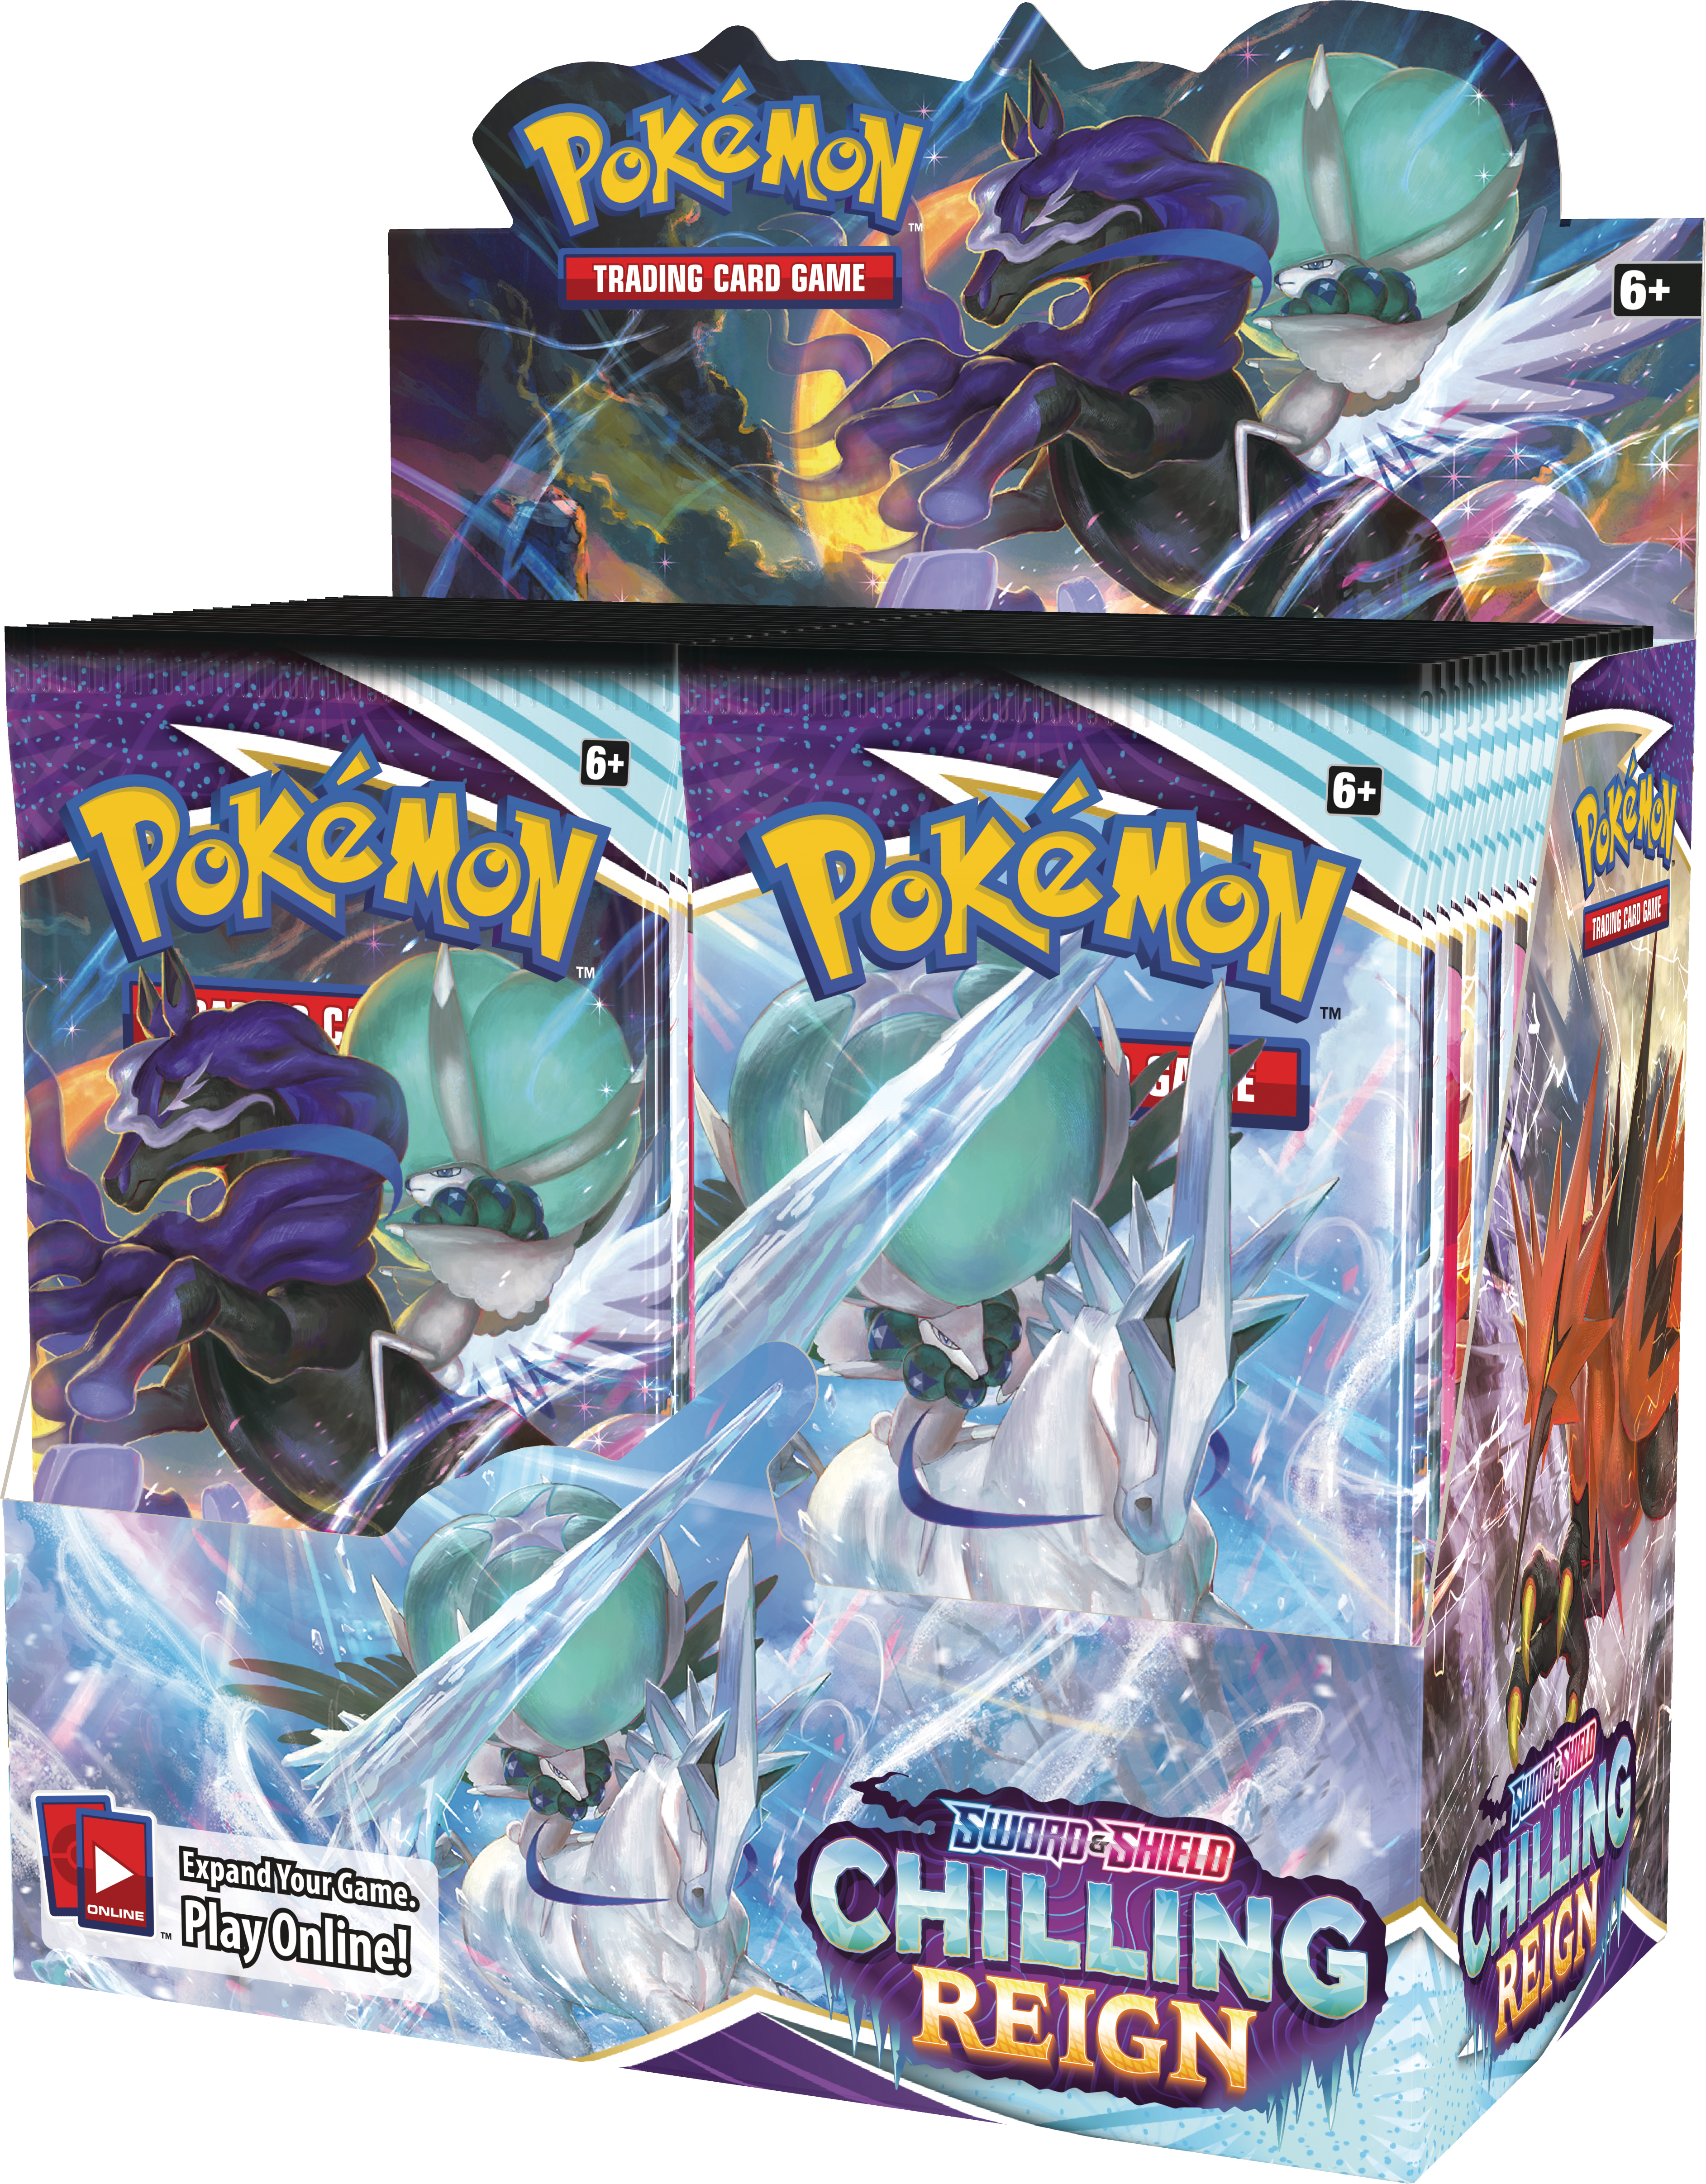 Sword & Shield: Chilling Reign Booster Box